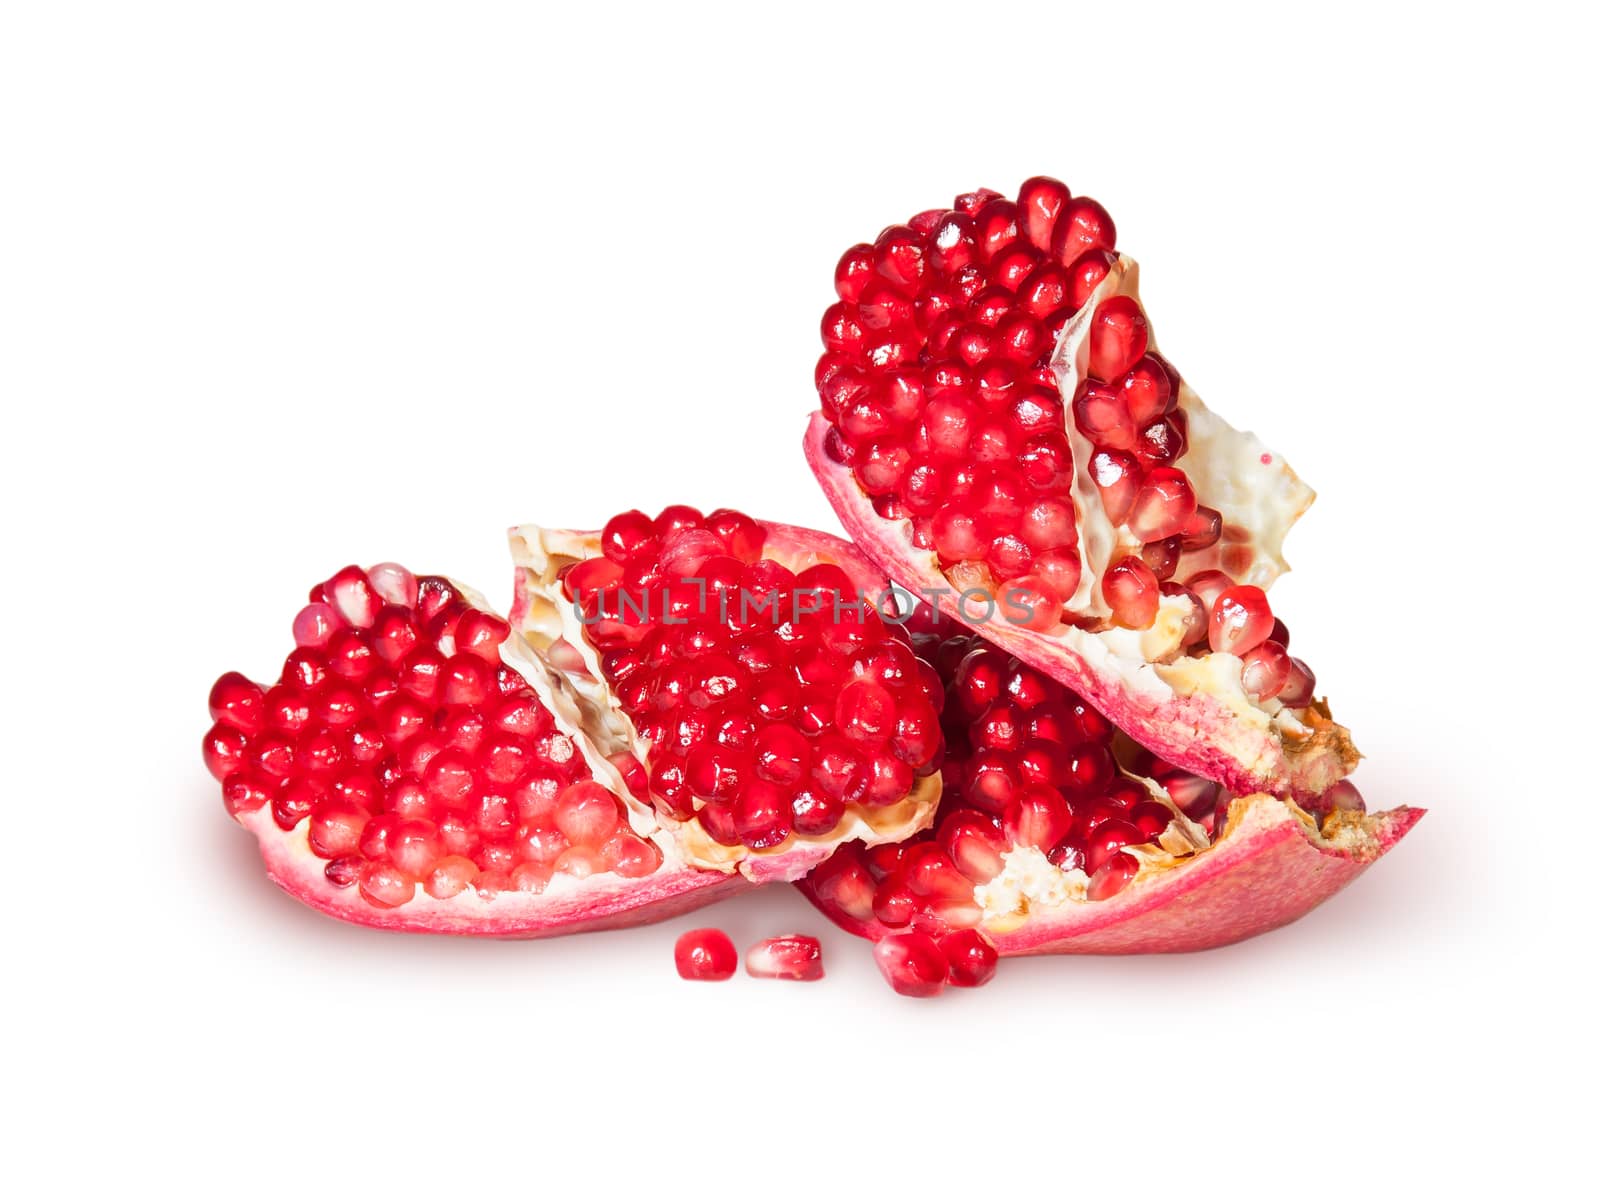 Several Of Ripe Juicy Pomegranate by Cipariss